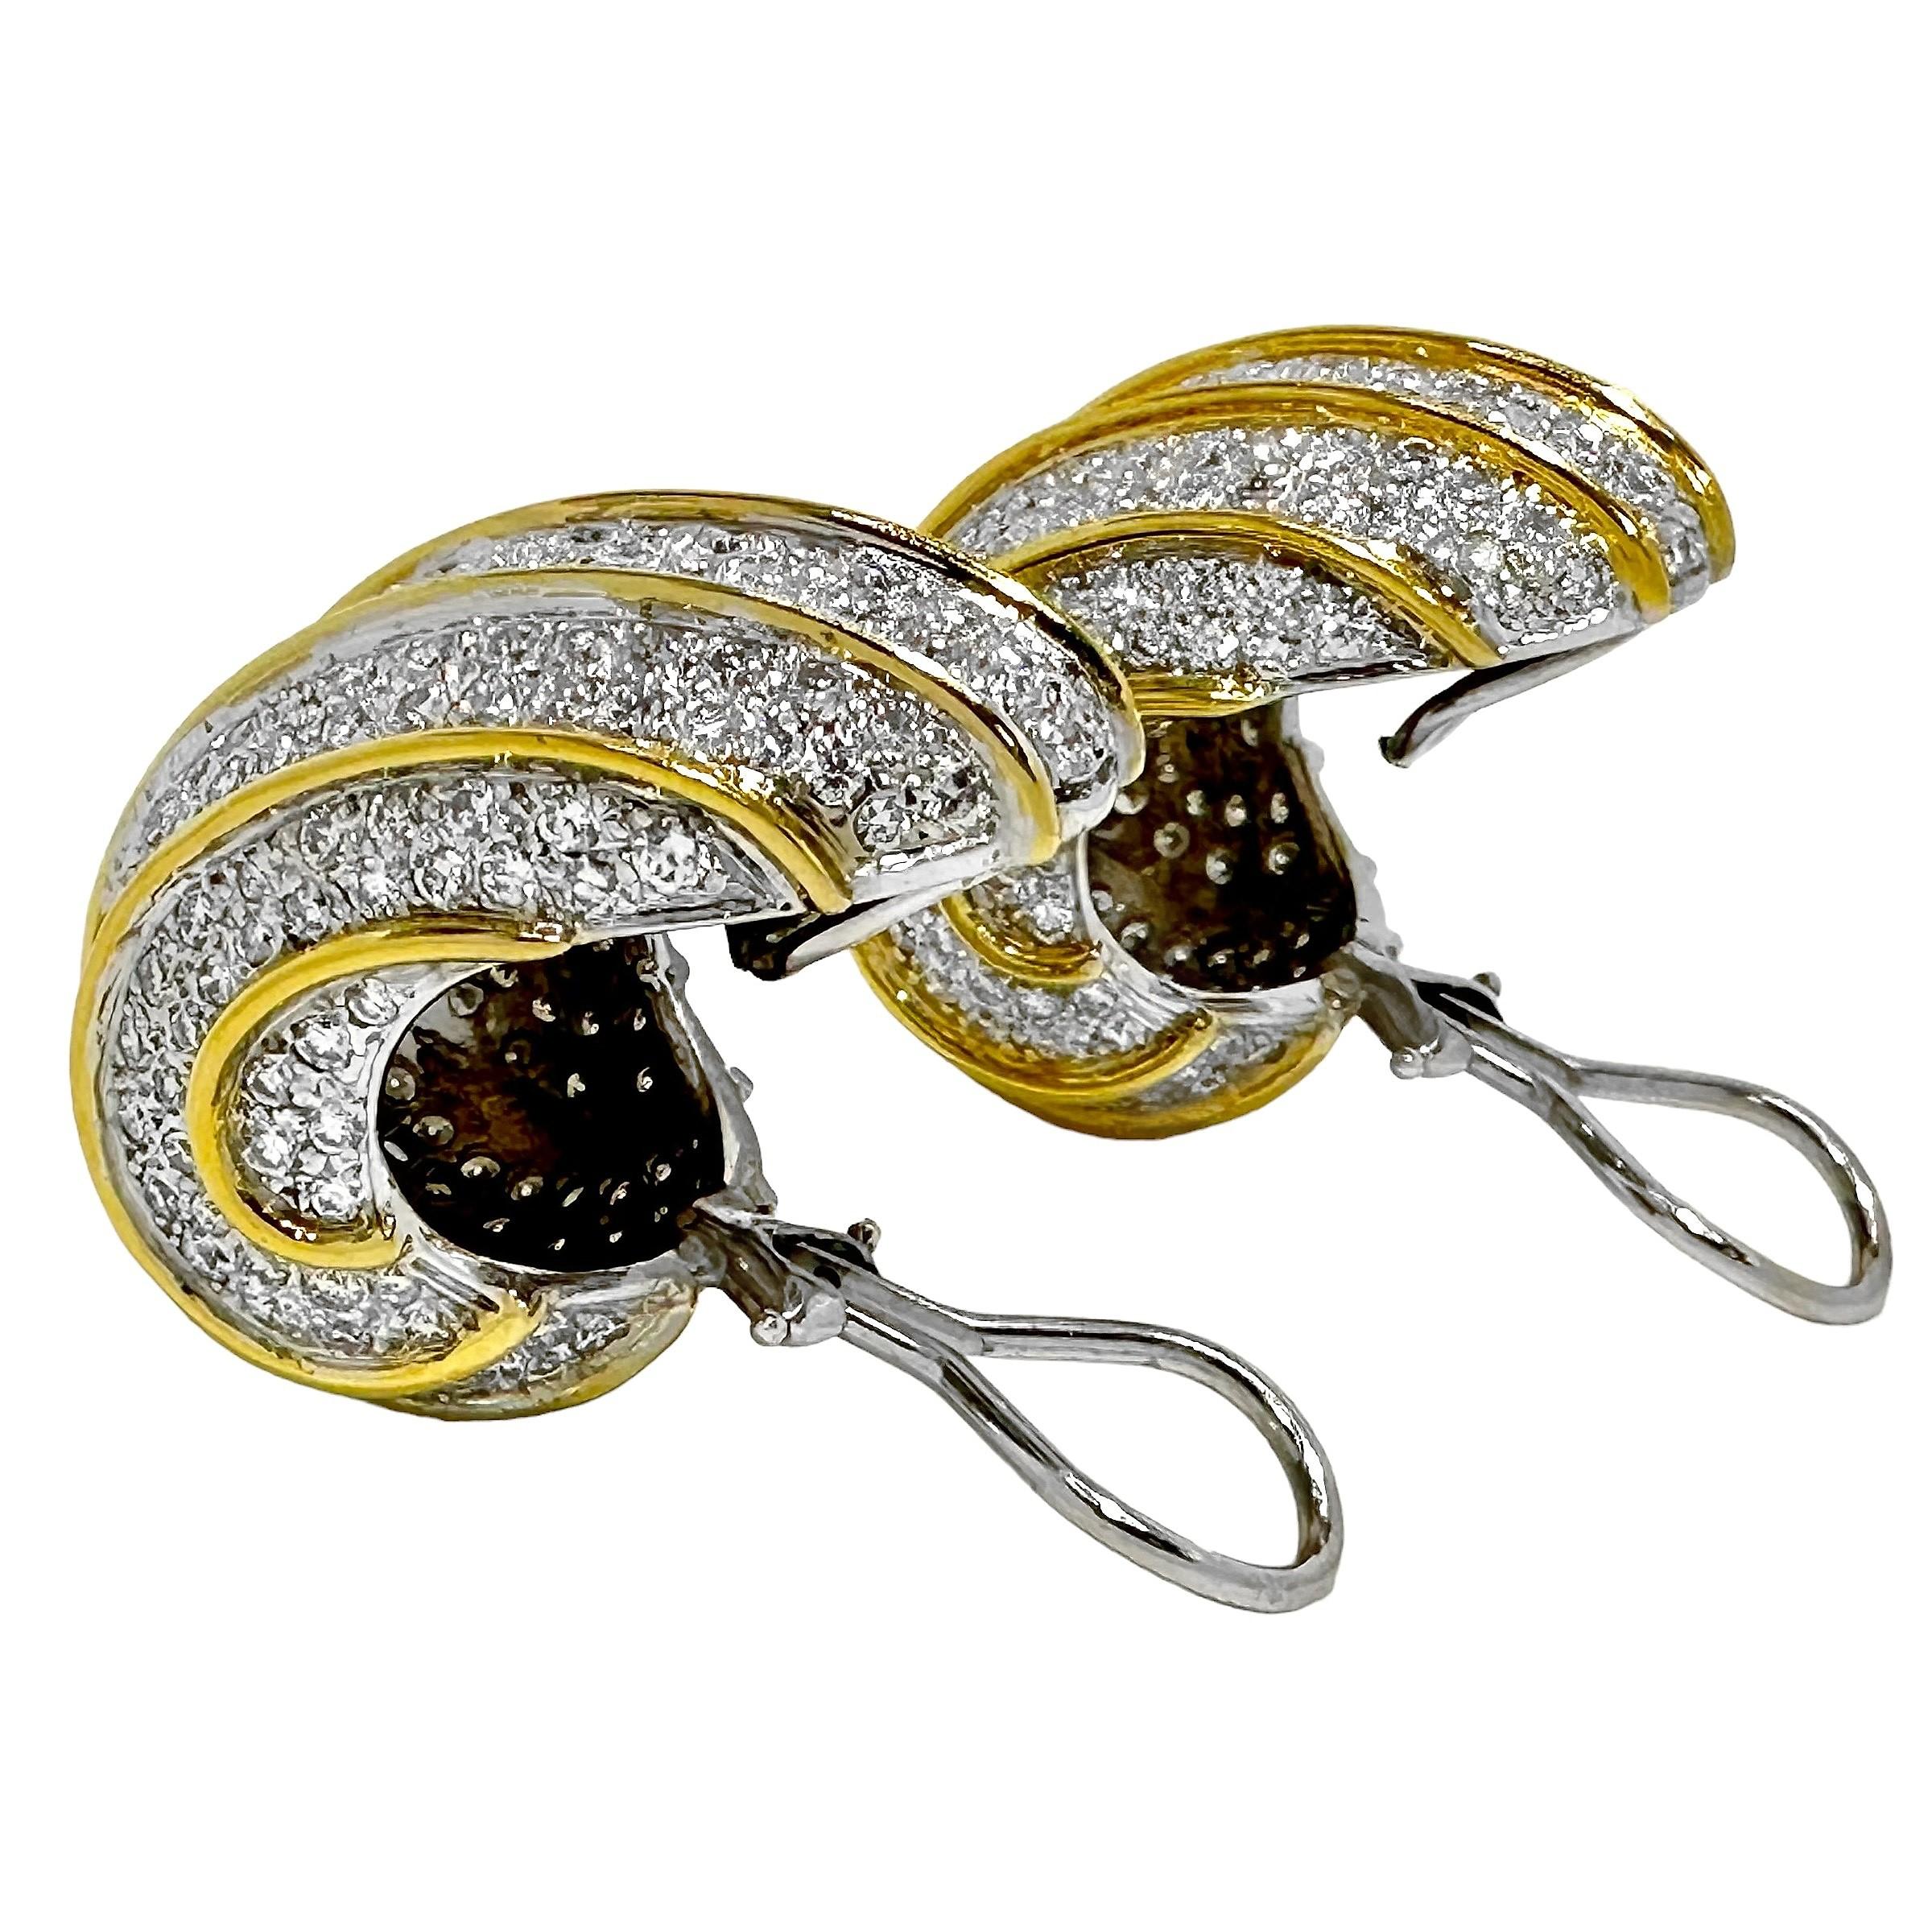 Modern 18K White & Yellow Gold Cocktail Earrings with 10Ct Total Approx. Diamond Weight For Sale